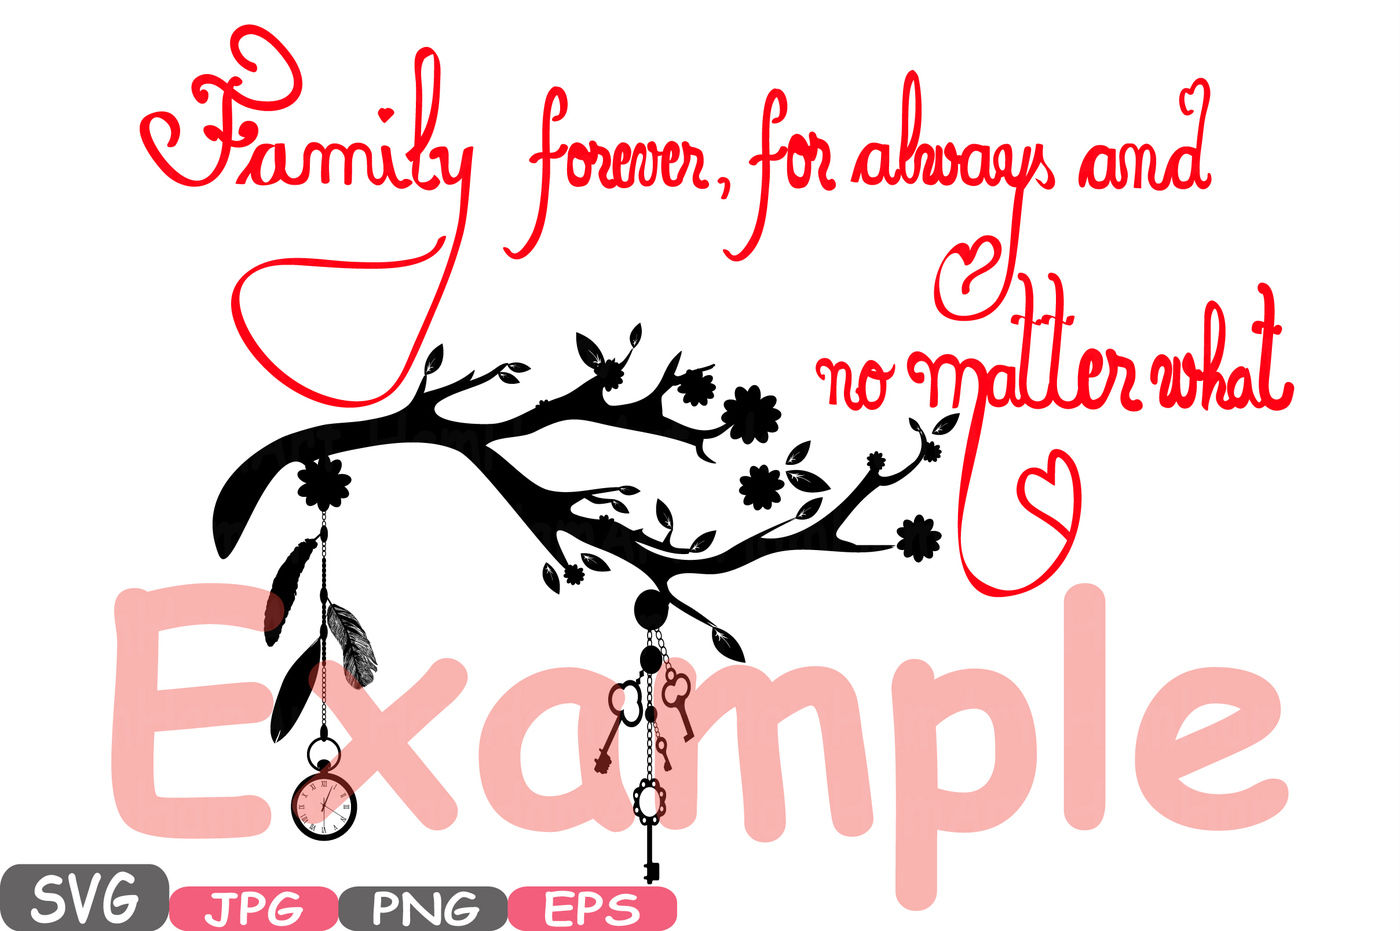 Download Family Forever Svg Word Art Family Quote Clip Art Silhouette Family Forever For Always And No Matter What Png Jpg Eps Family Love 510s By Hamhamart Thehungryjpeg Com